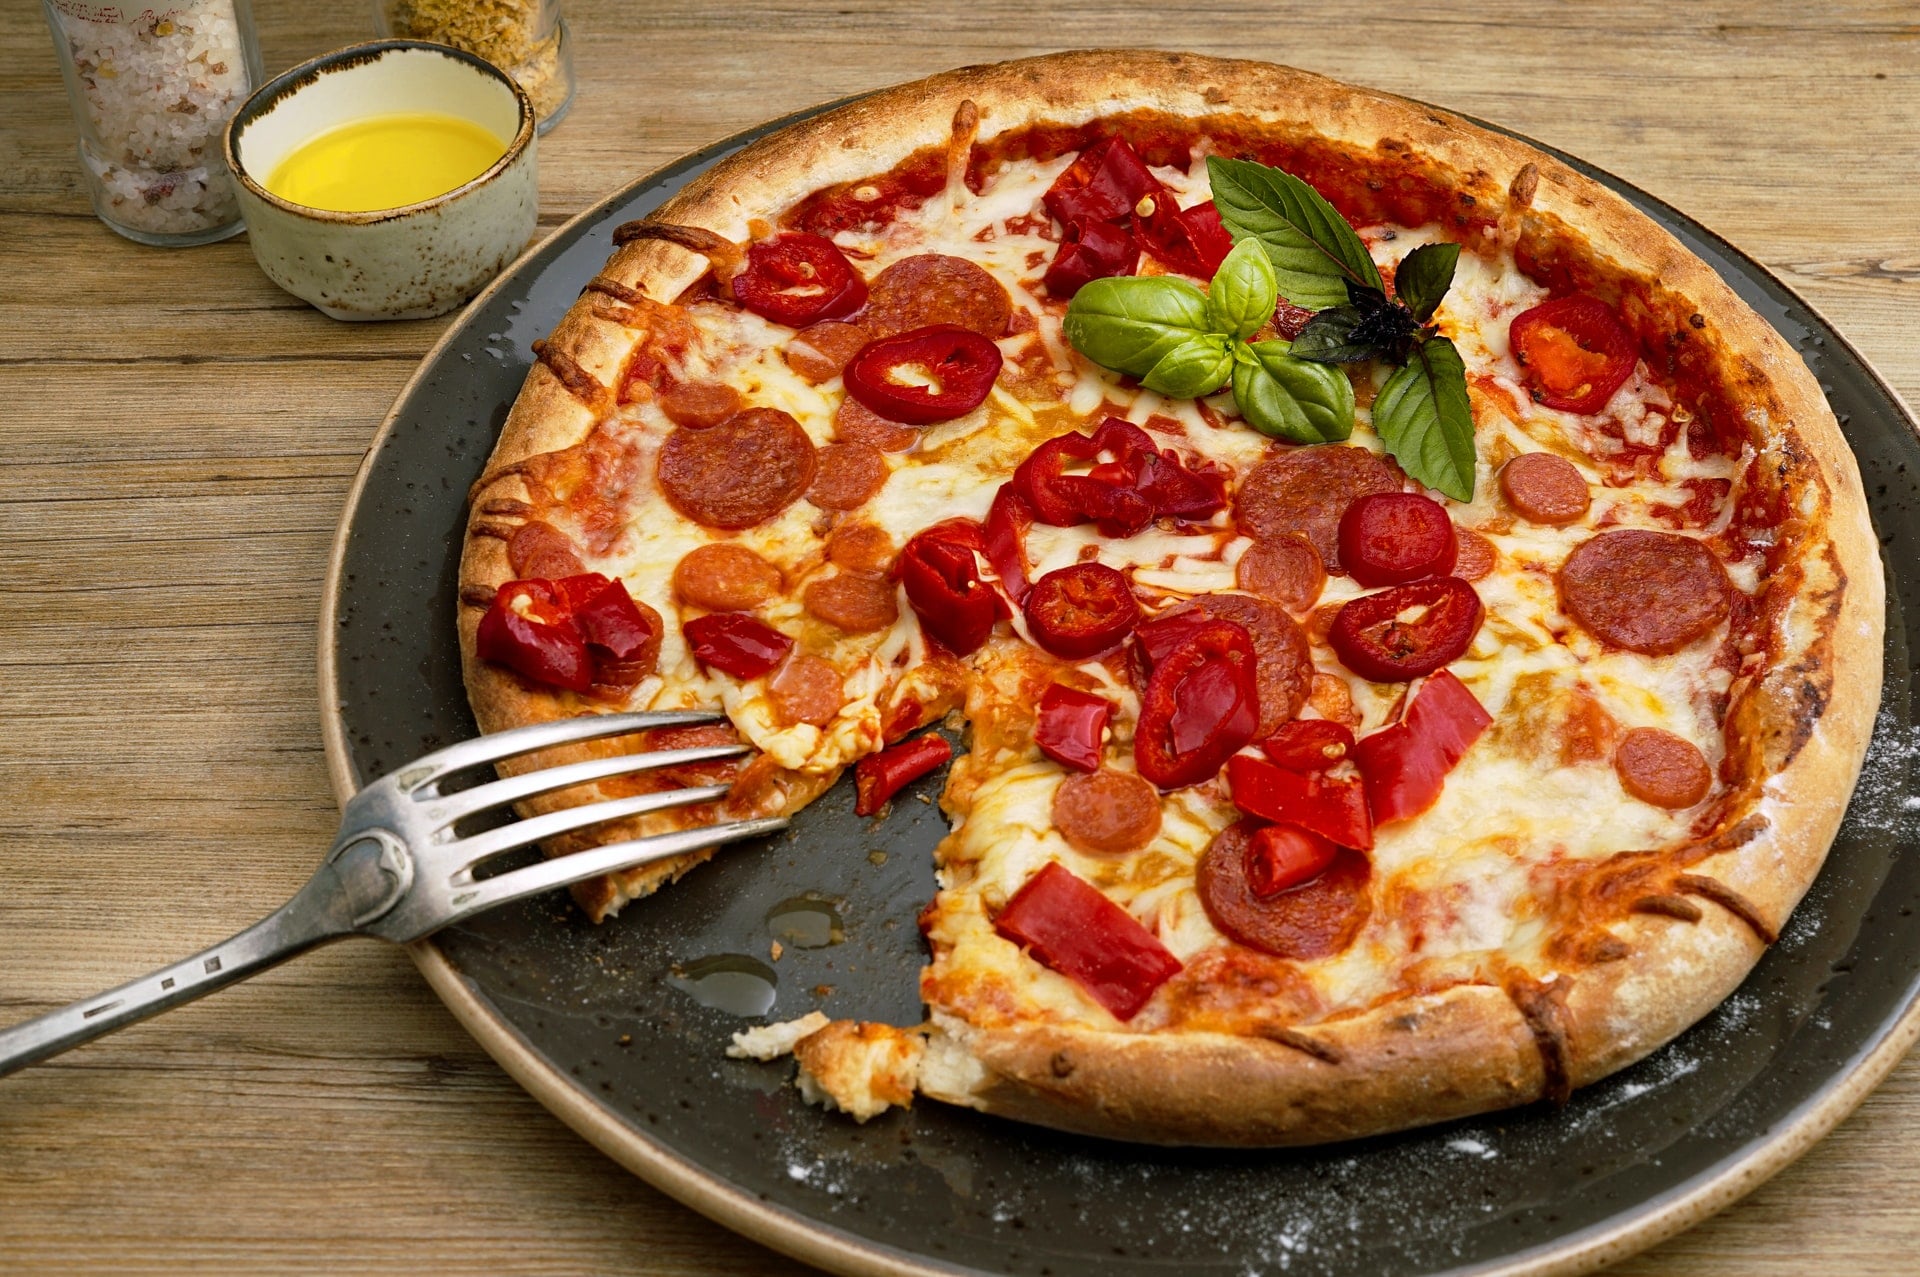 Top 10 Types of Pizza - Image 10